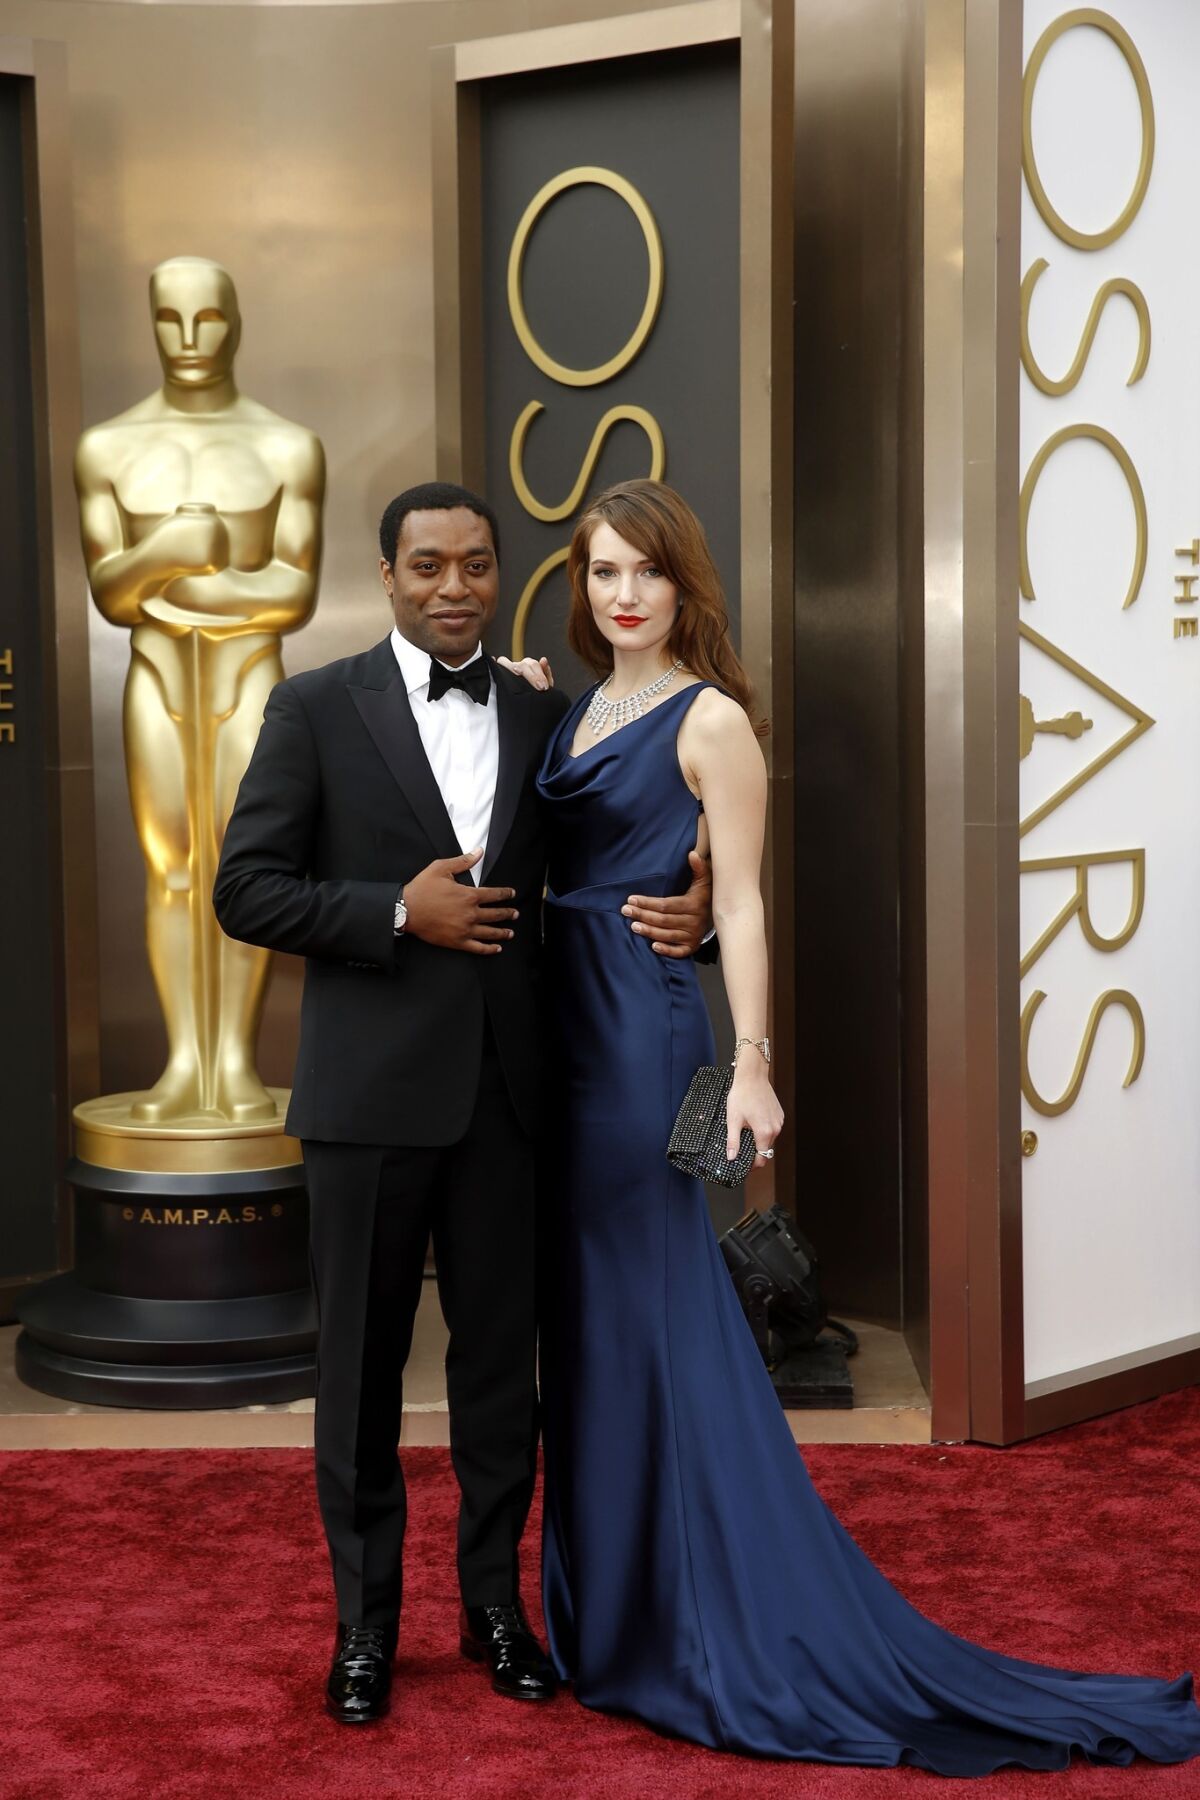 Chiwetel Ejiofor (pictured with Sari Mercer) has a sister, Zain Asher, who works for CNN and took time to record a special message for her brother. E! News played the message for the lead actor nominee Ejiofor, who seemed visibly moved by watching the video live on the red carpet.